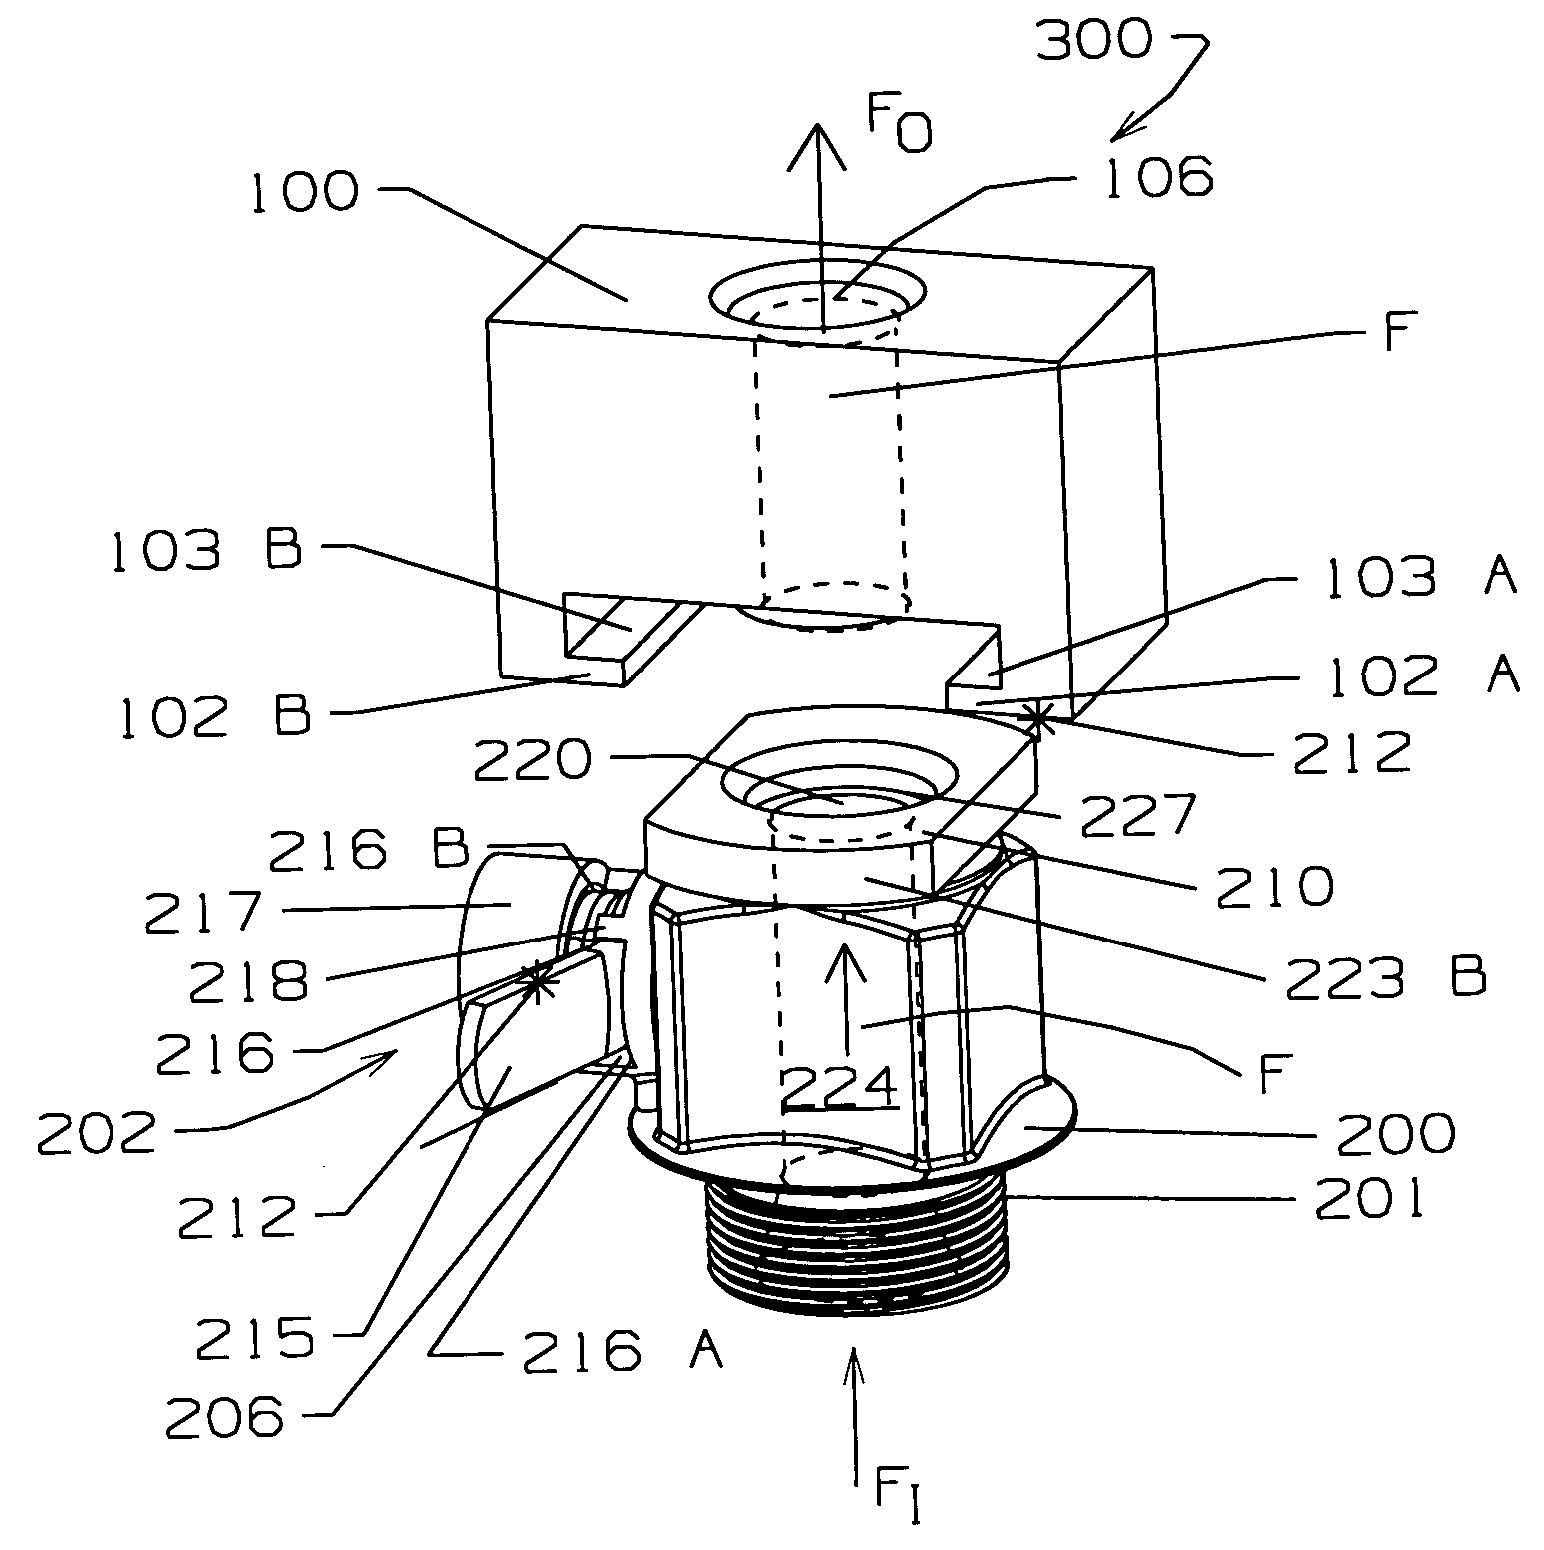 Flowable-material transfer device and system